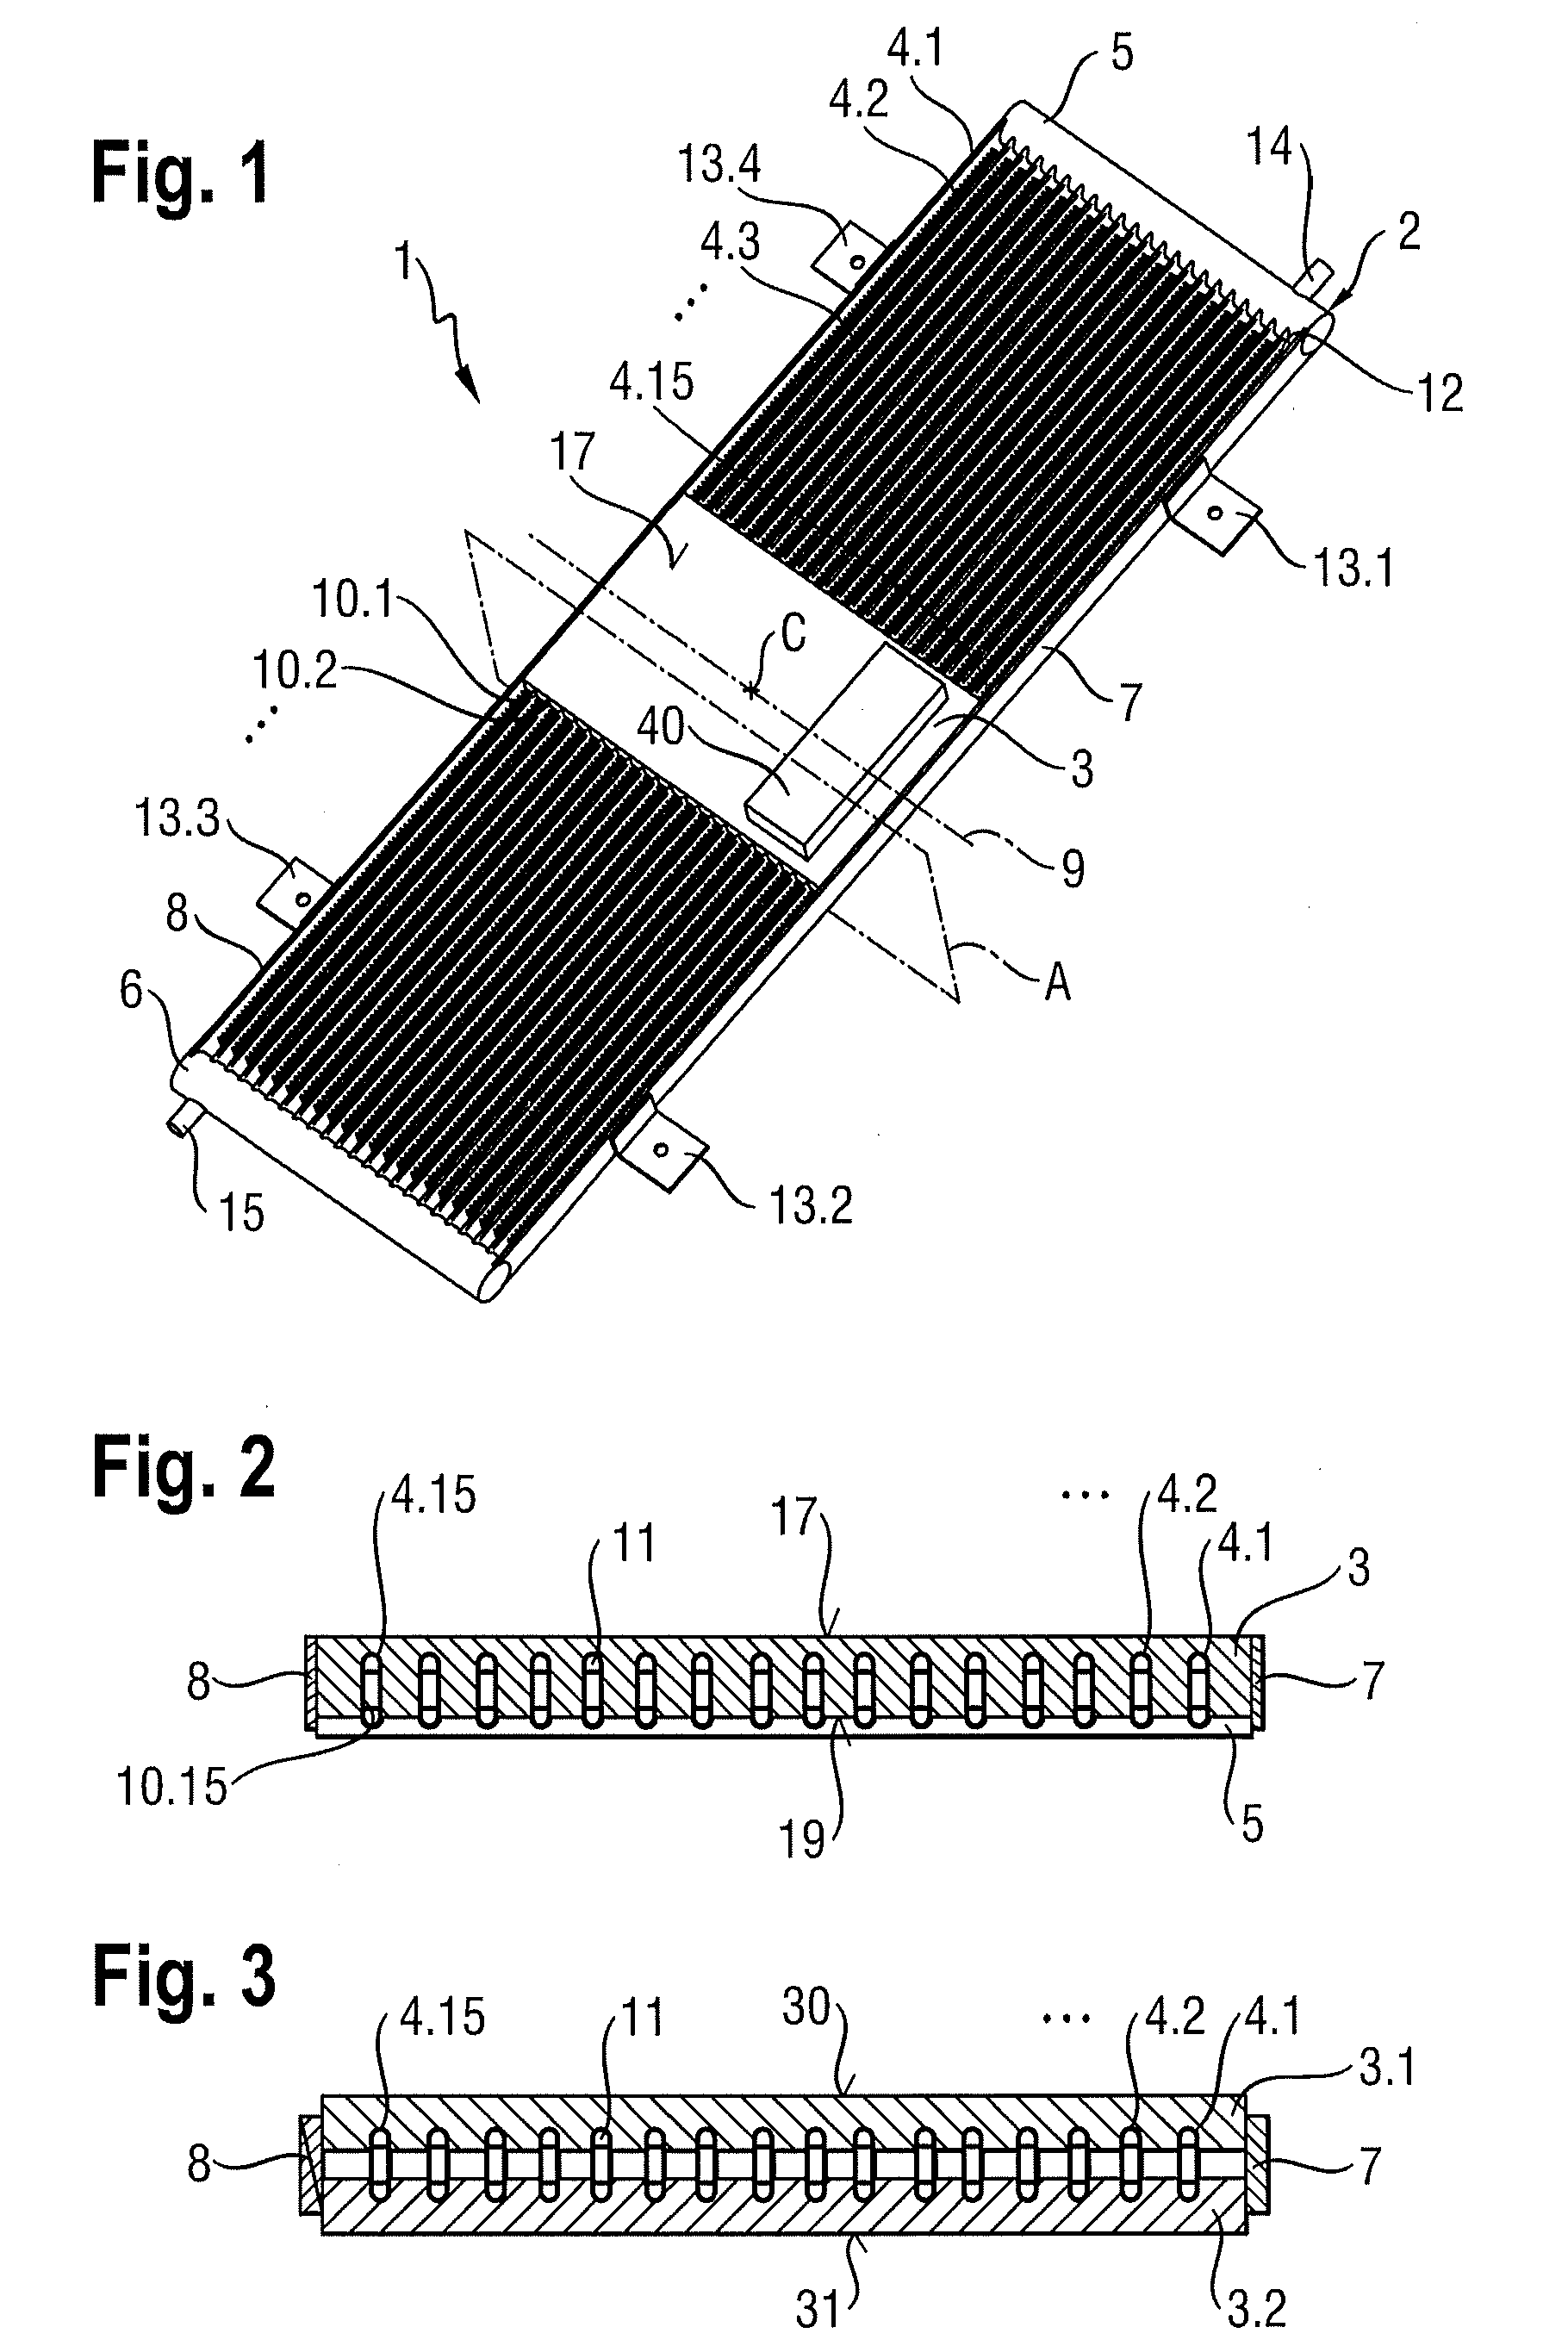 Anti-gravity thermosyphon heat exchanger and a power module